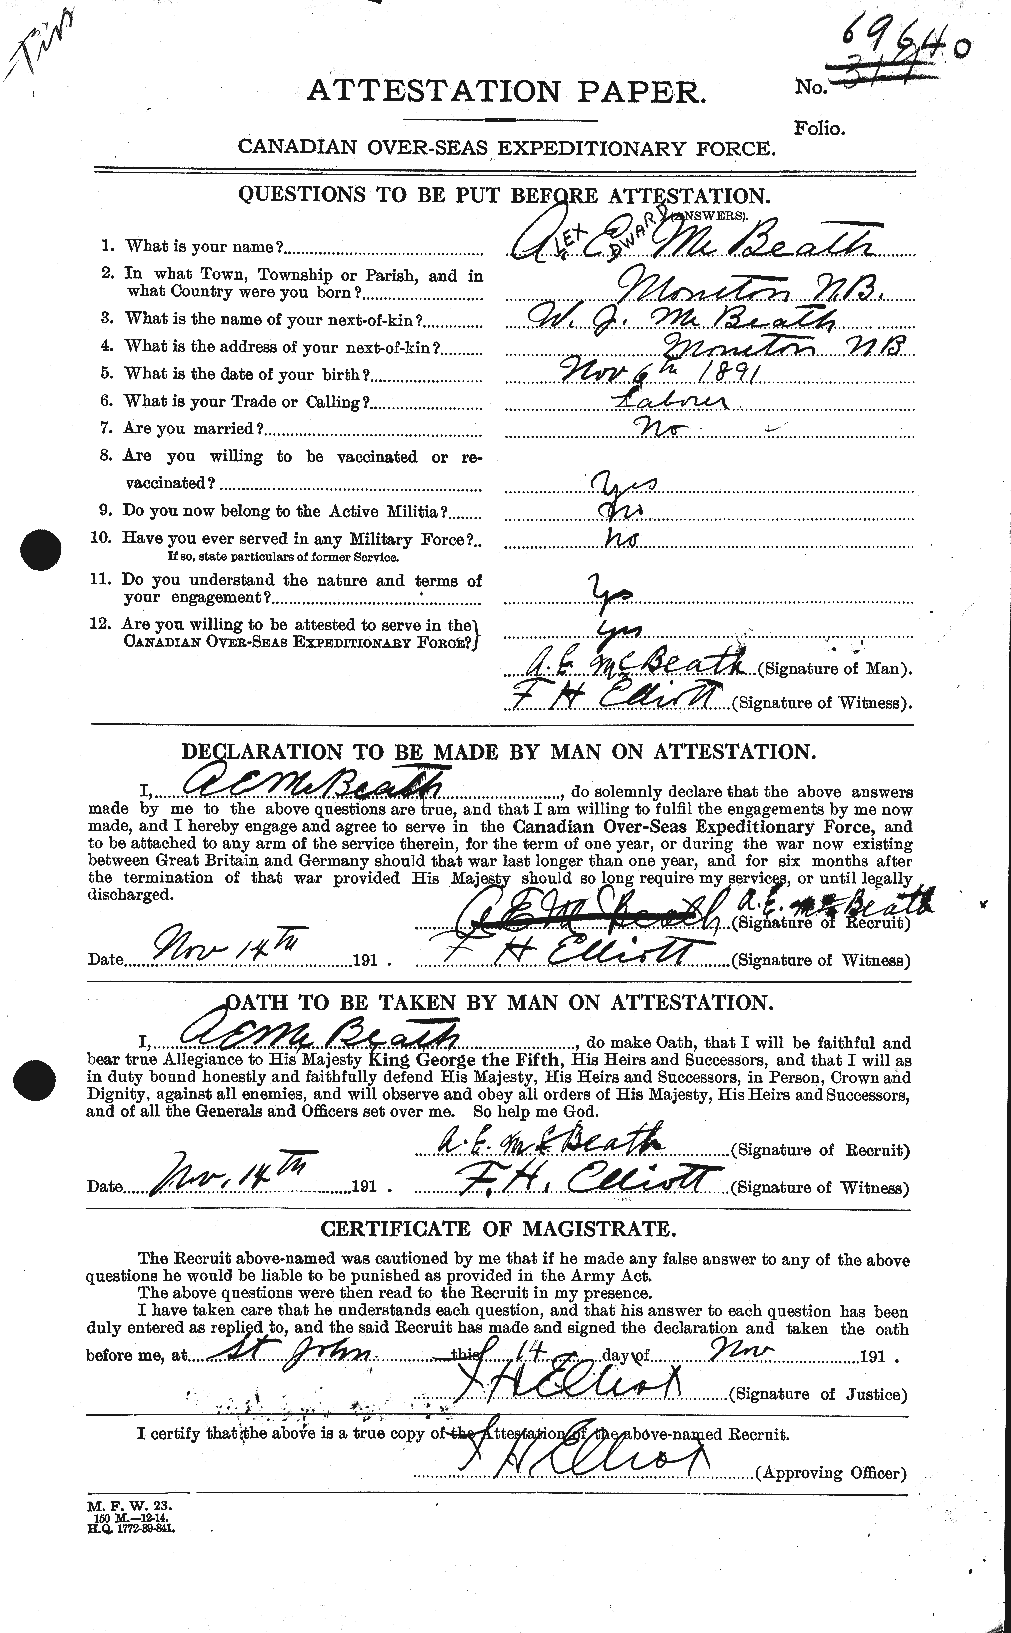 Personnel Records of the First World War - CEF 132394a